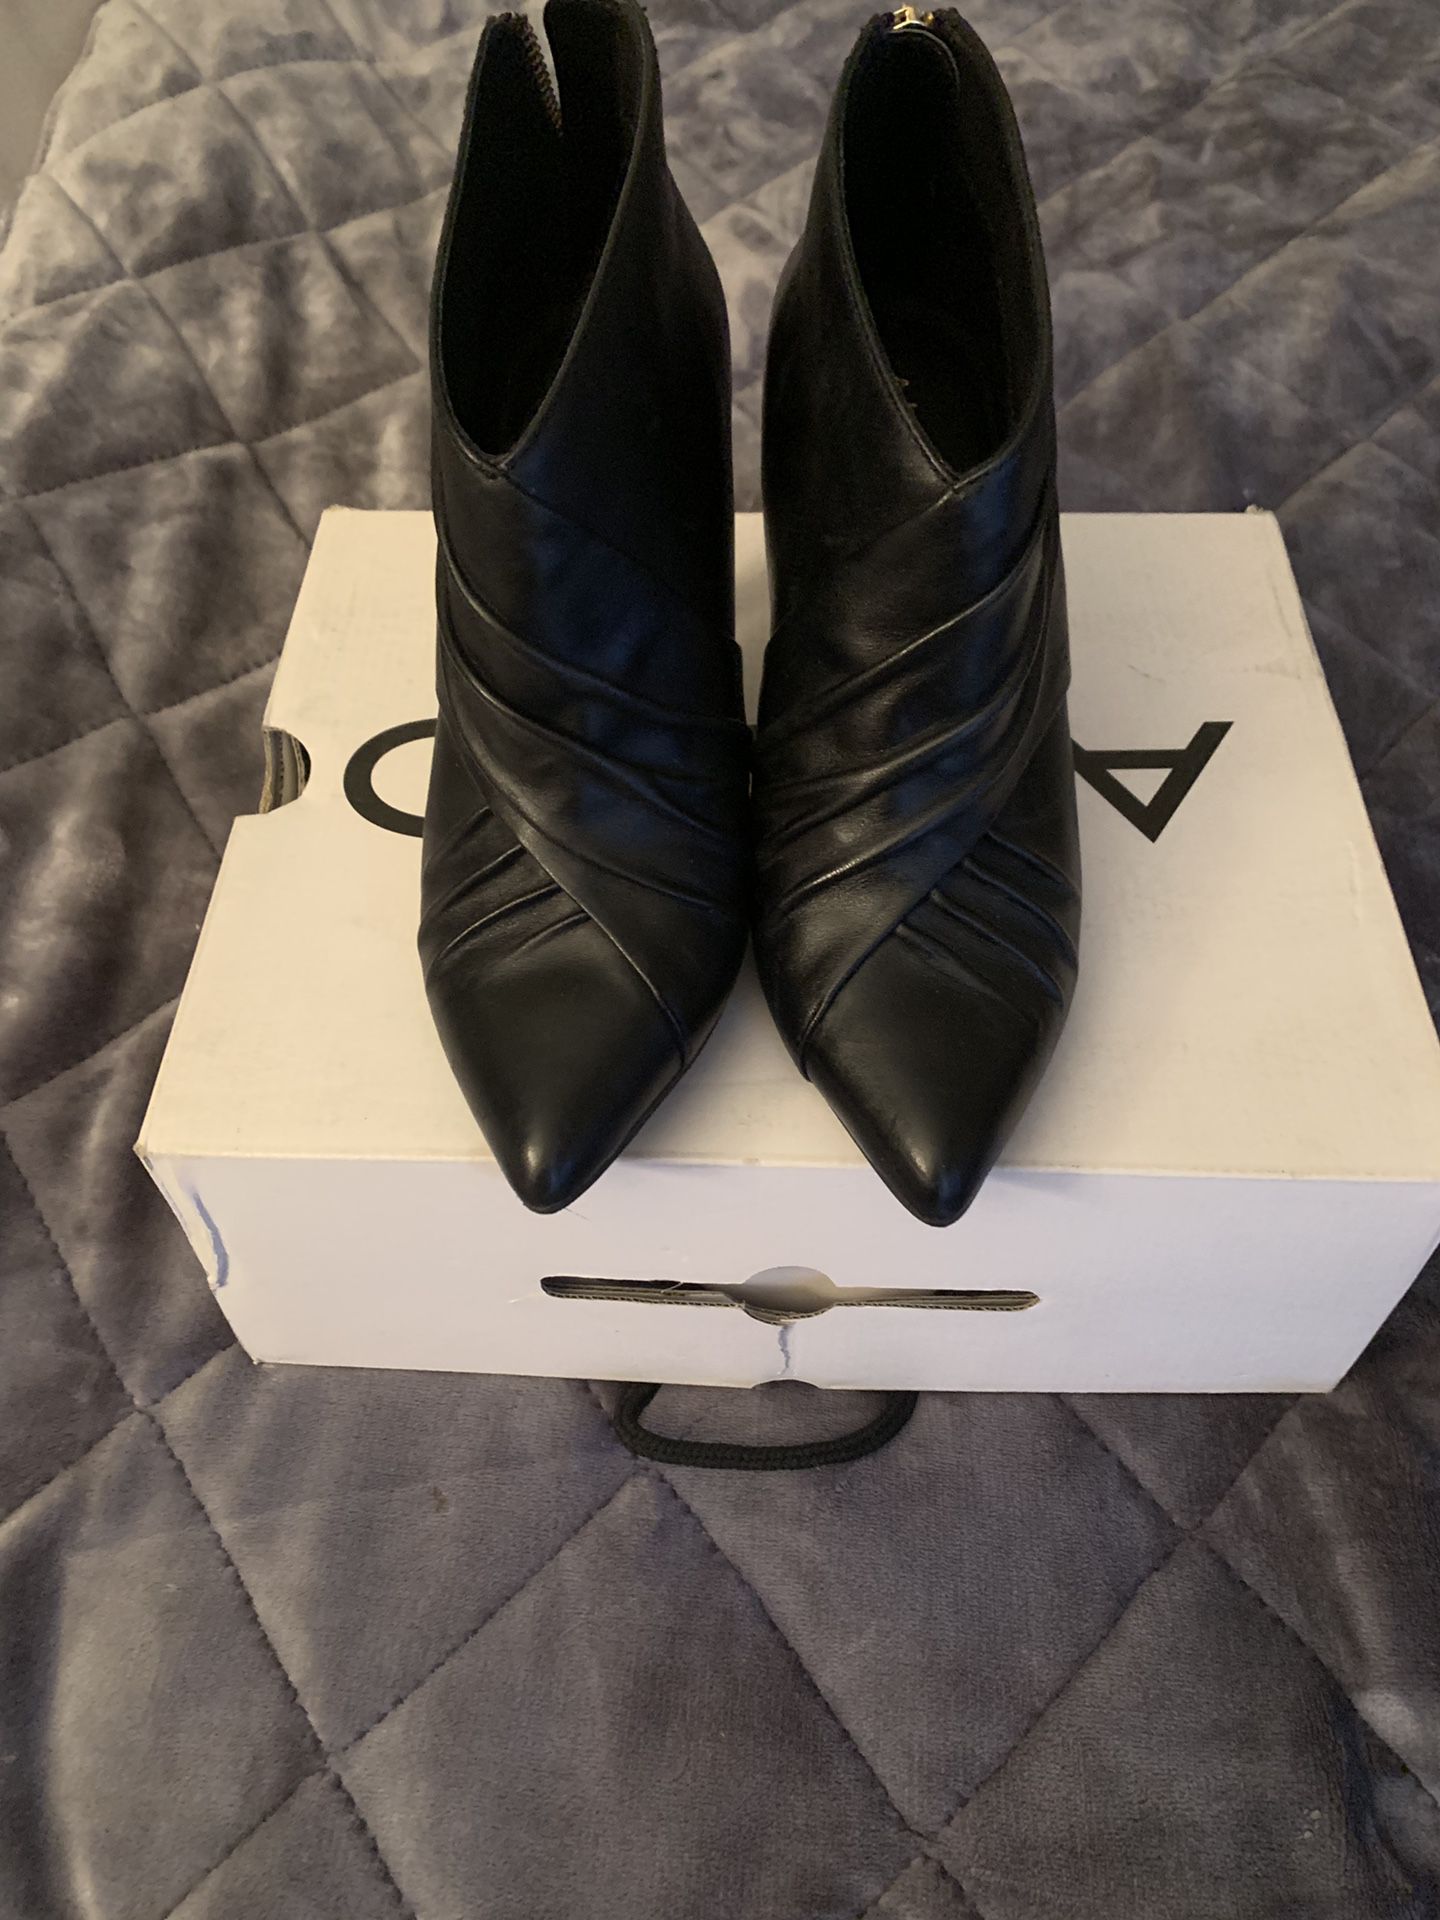 ALDO woman’s black leather ankle boot. Great condition wore once, smoke feee home